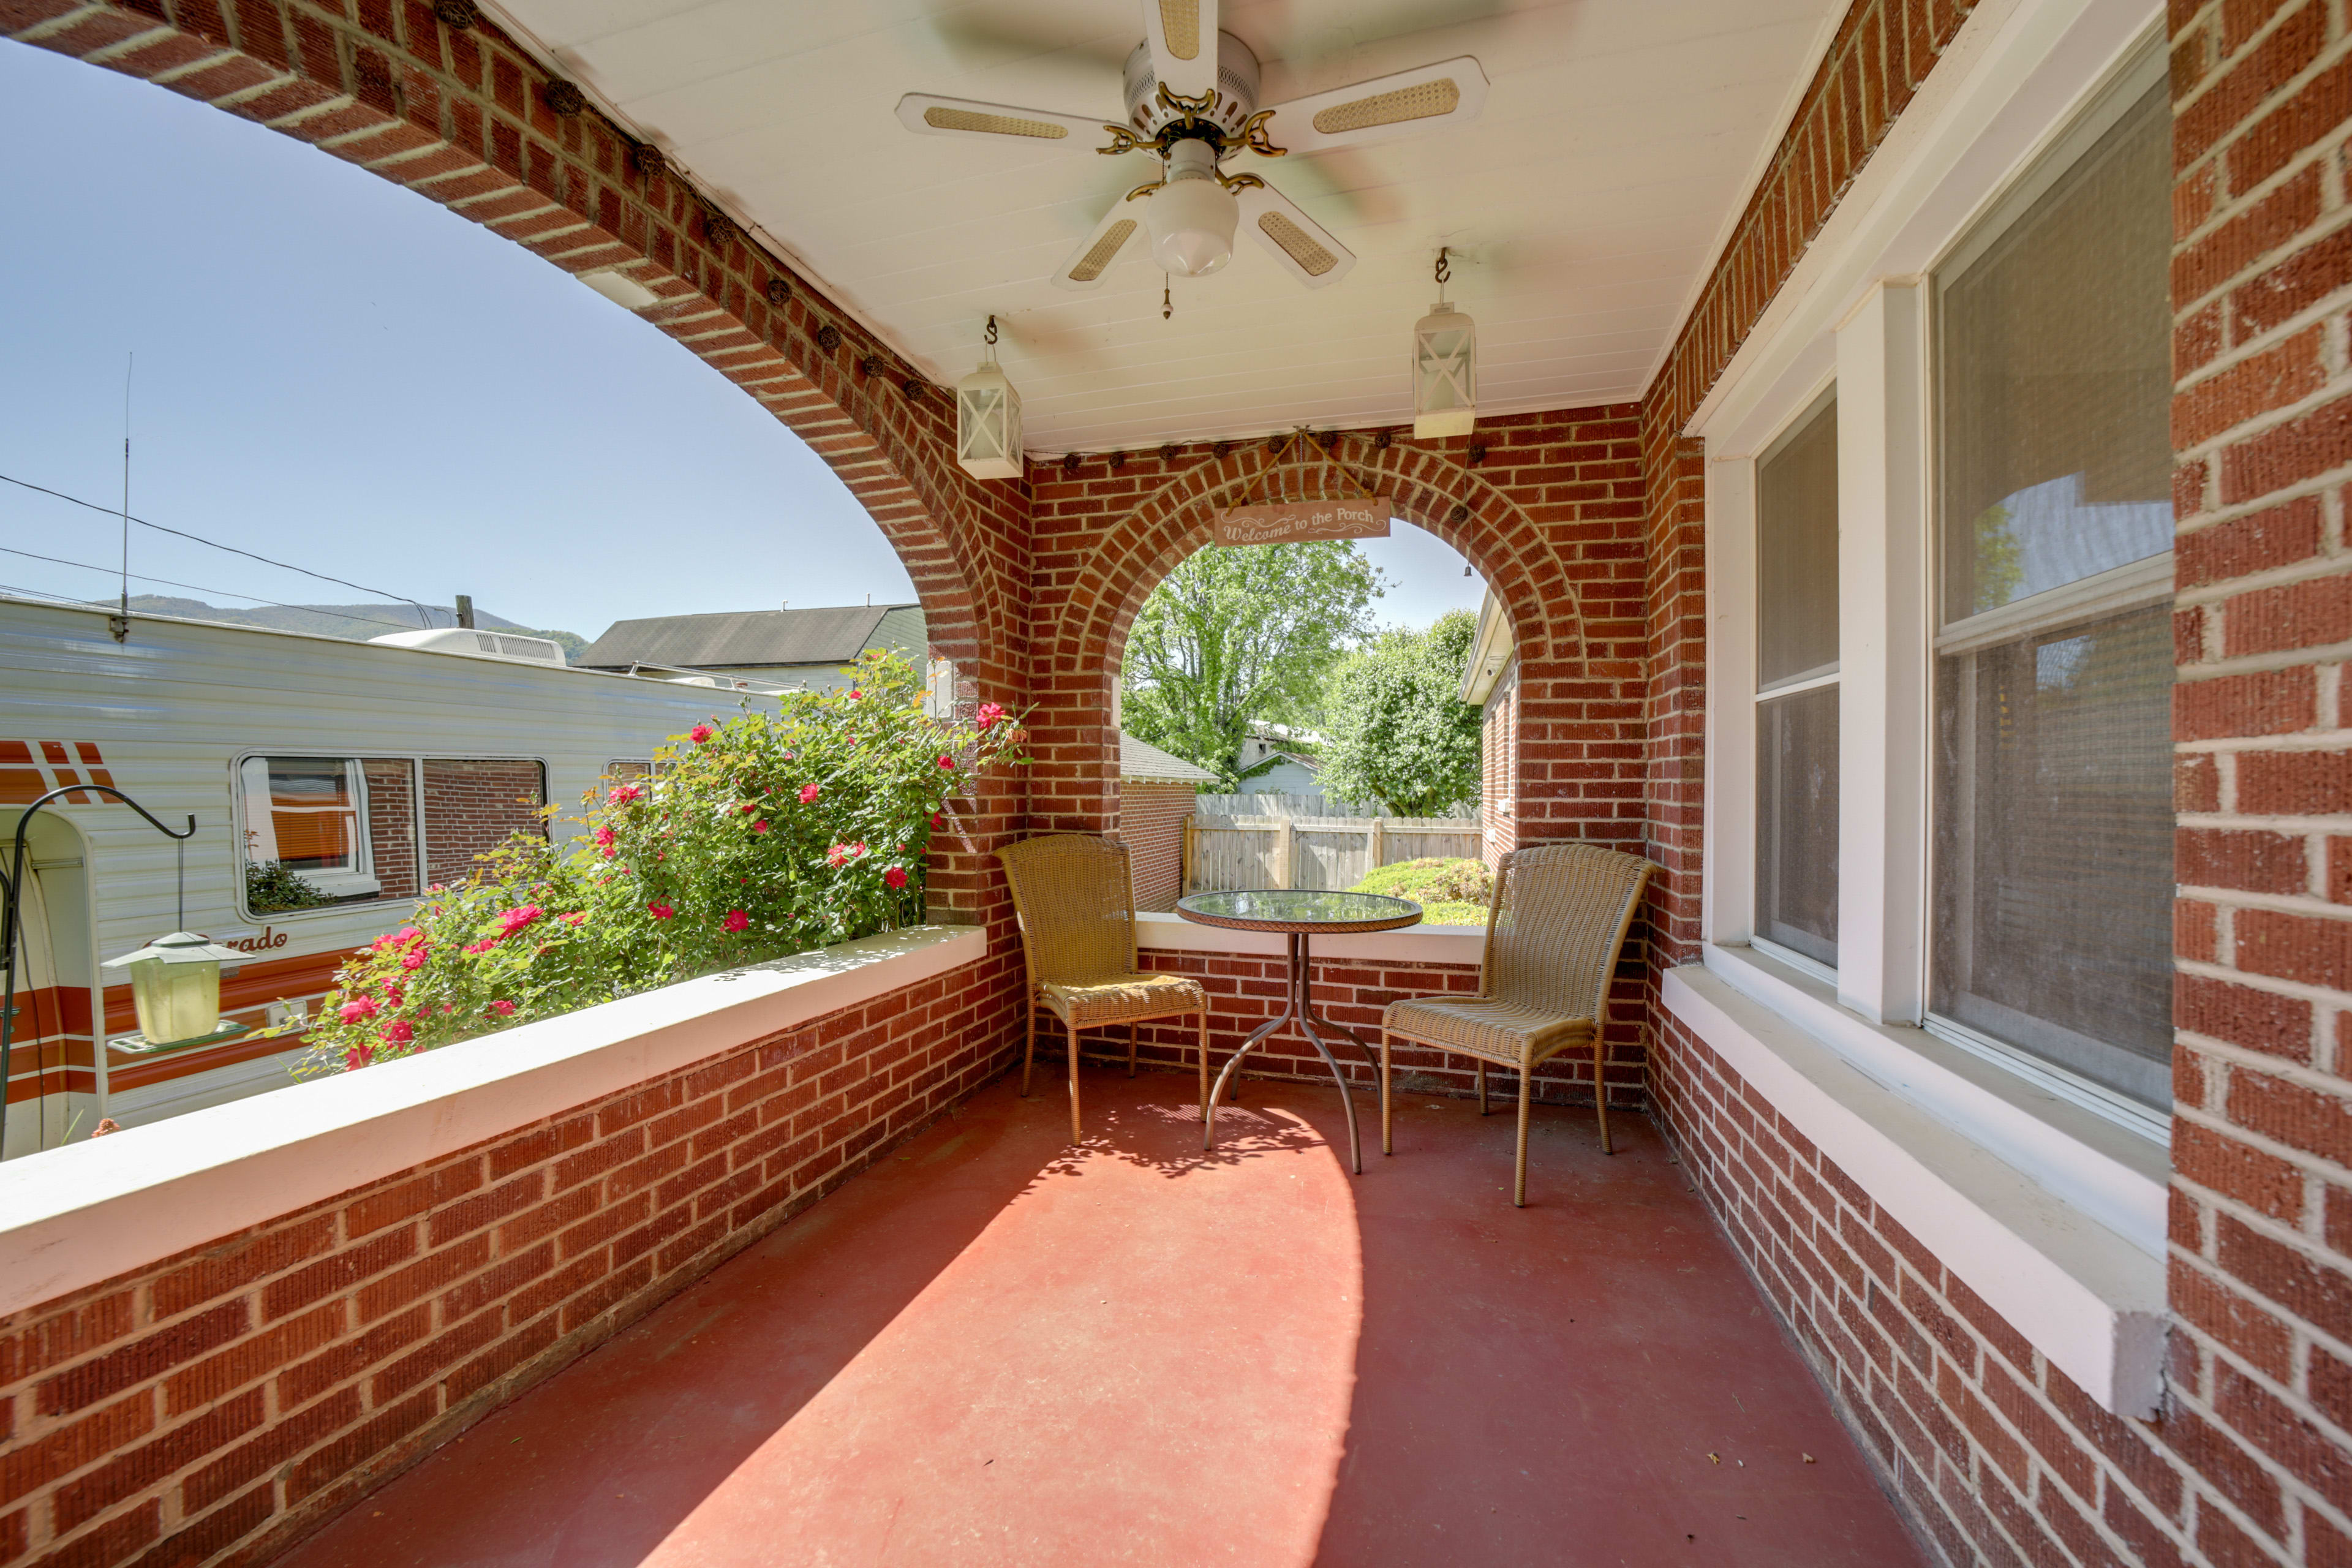 Covered Porch | Gas Grill